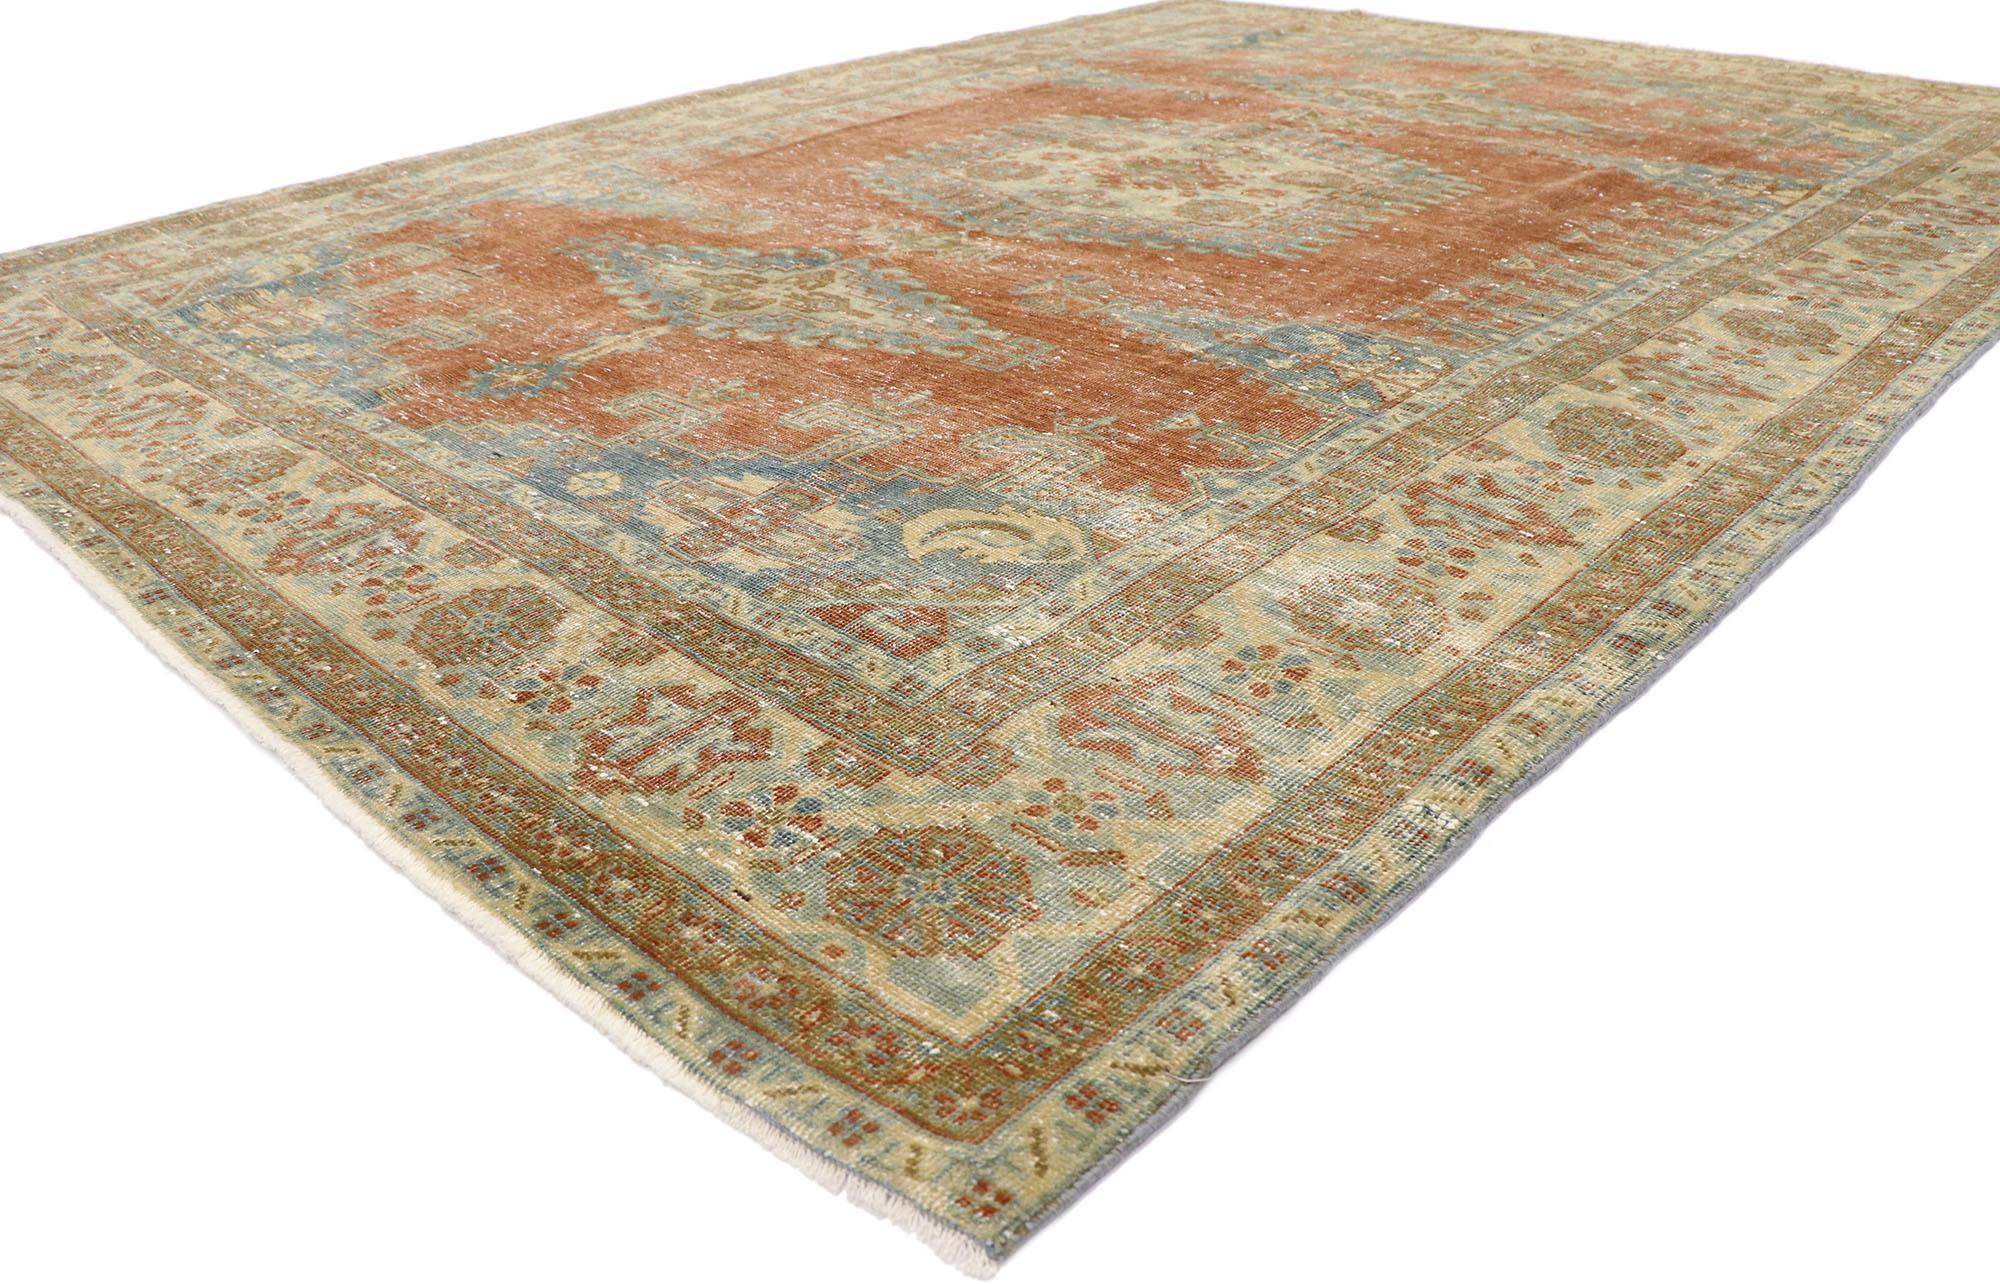 ?60958 Distressed Vintage Persian Viss rug with Rustic Tribal Style 07'07 x 09'11. ?Emanating sophistication and nomadic charm with rugged beauty, this hand knotted wool distressed vintage Persian Viss rug beautifully embodies a rustic tribal style.